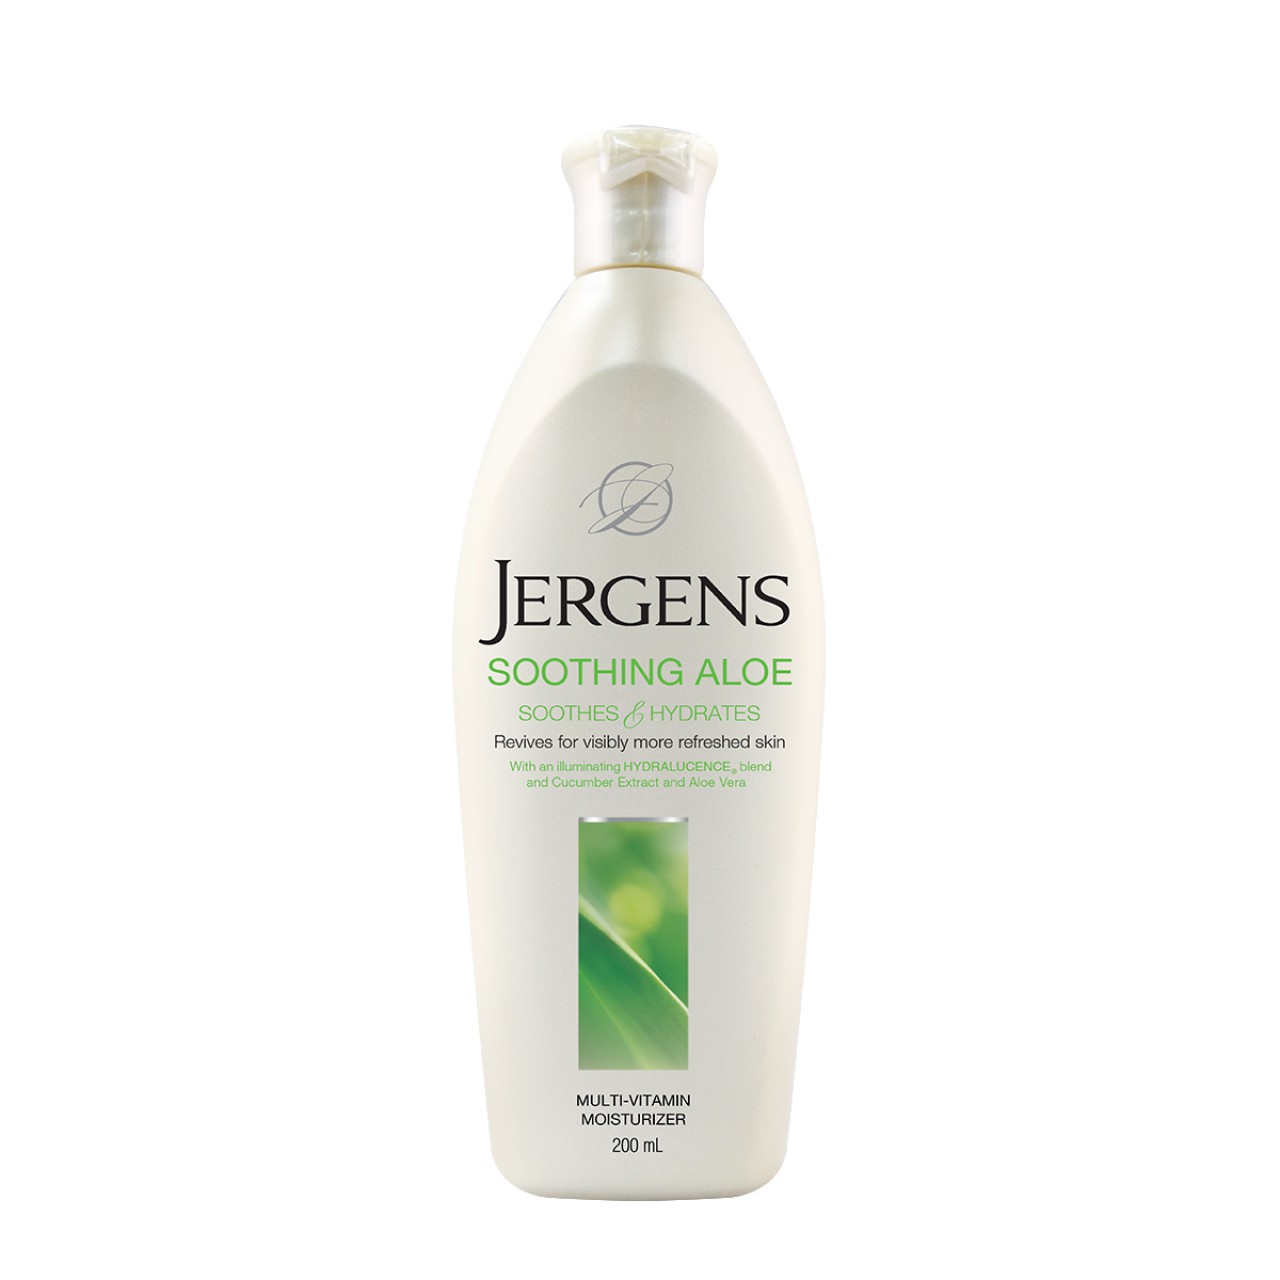 JERGENS SOOTHING ALOE LOT200ML